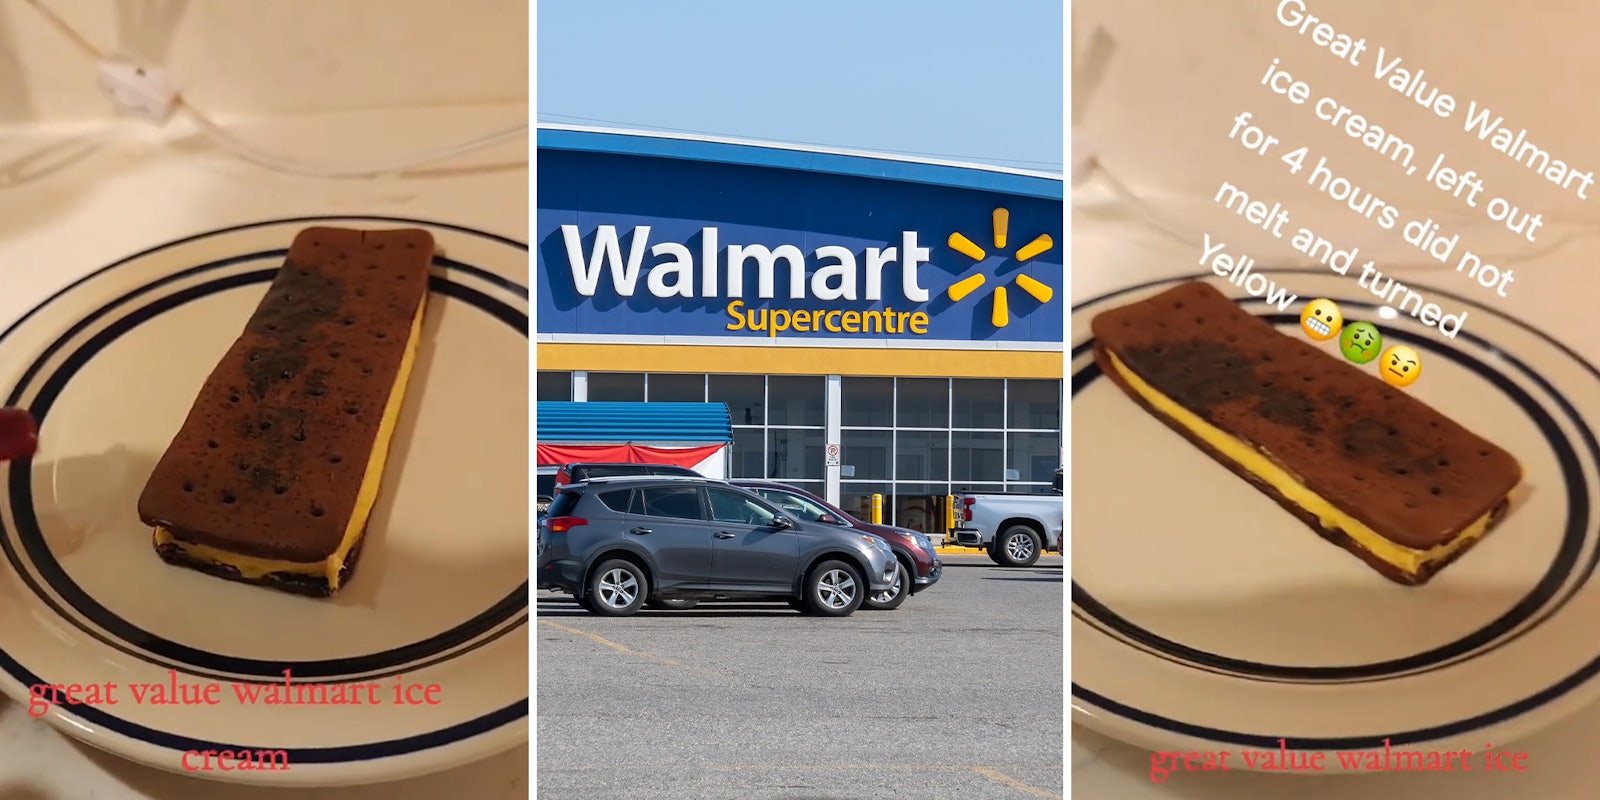 Walmart shopper notices something unusual about the Great Value ice cream